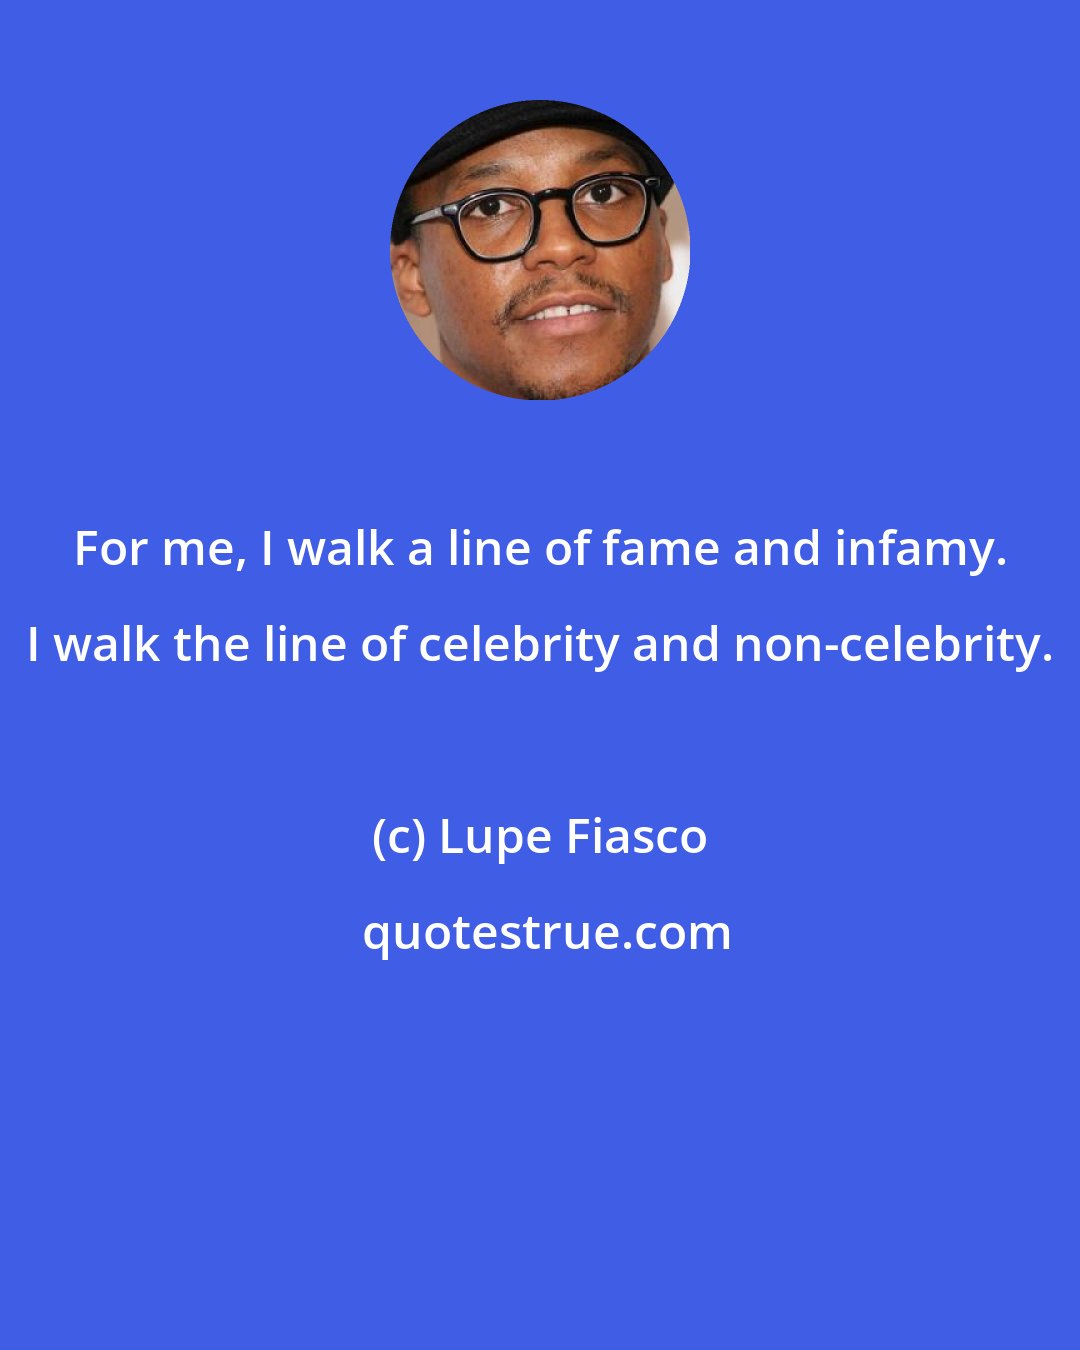 Lupe Fiasco: For me, I walk a line of fame and infamy. I walk the line of celebrity and non-celebrity.